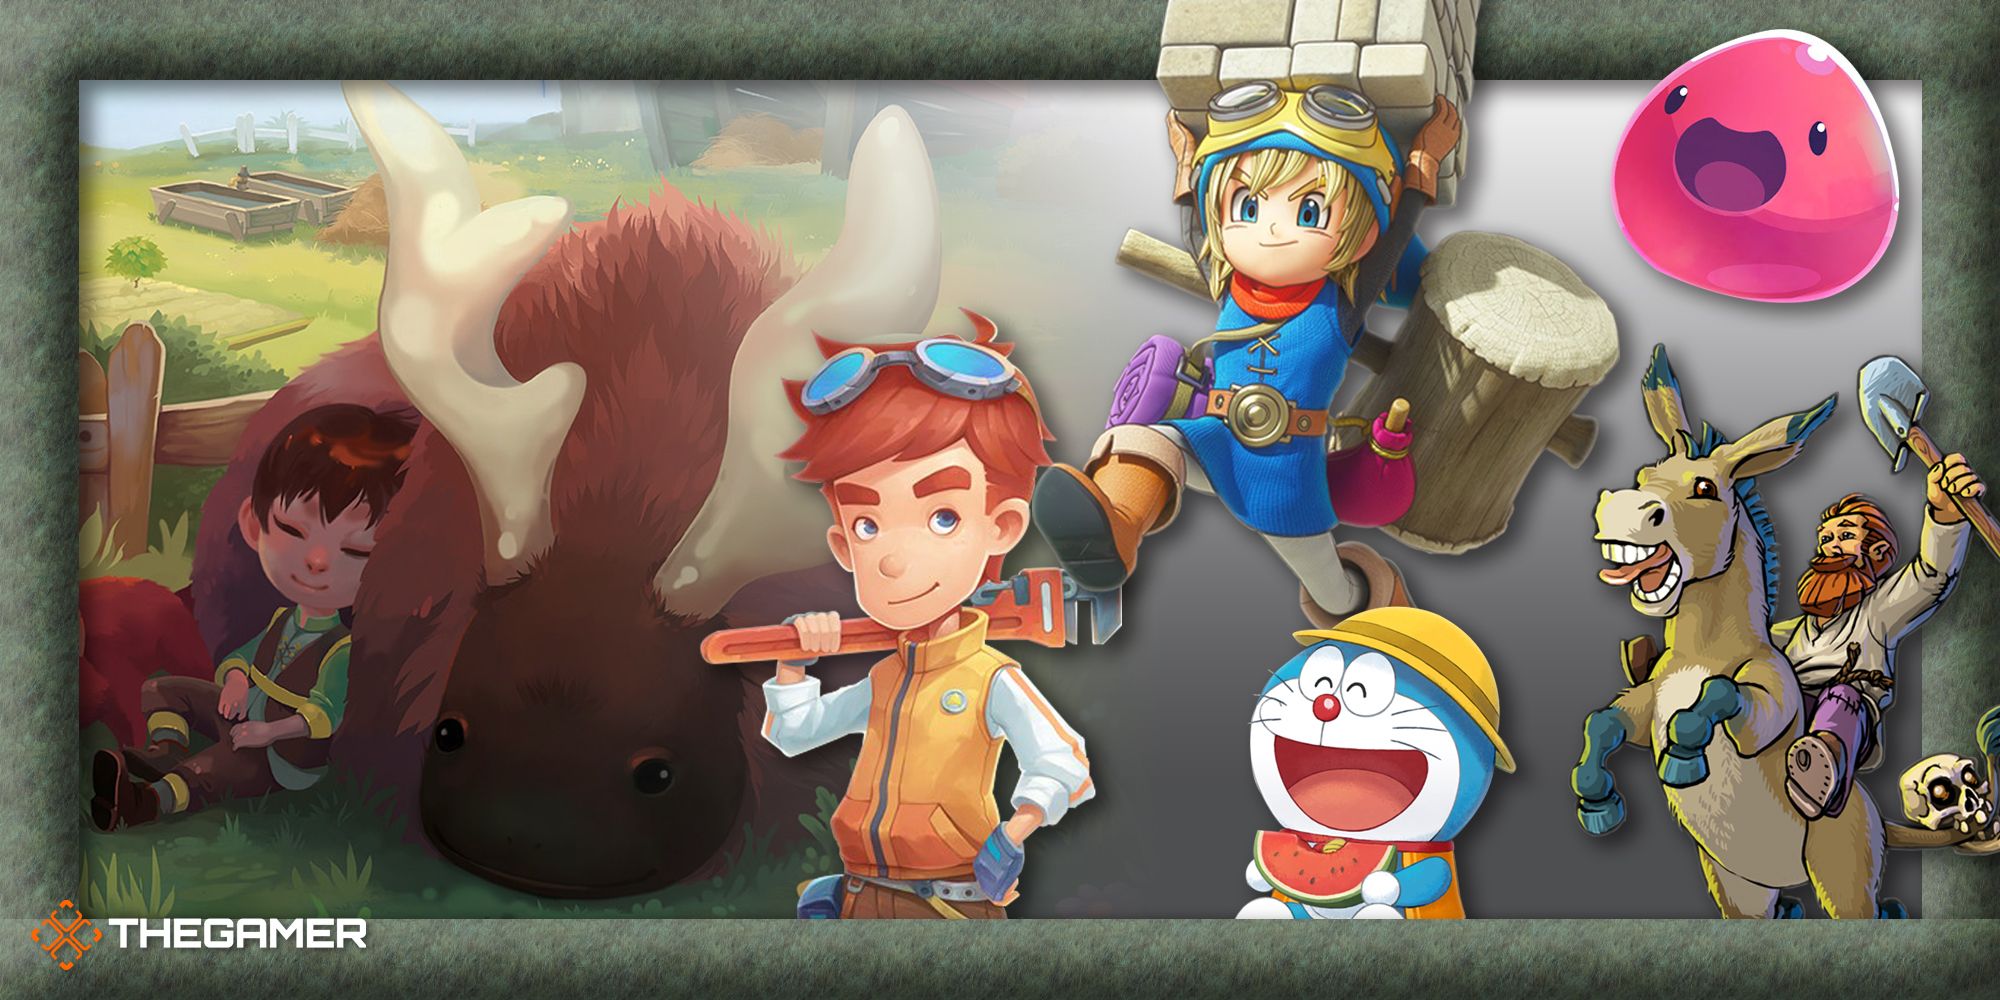 Character images from several farming games that are on the list.